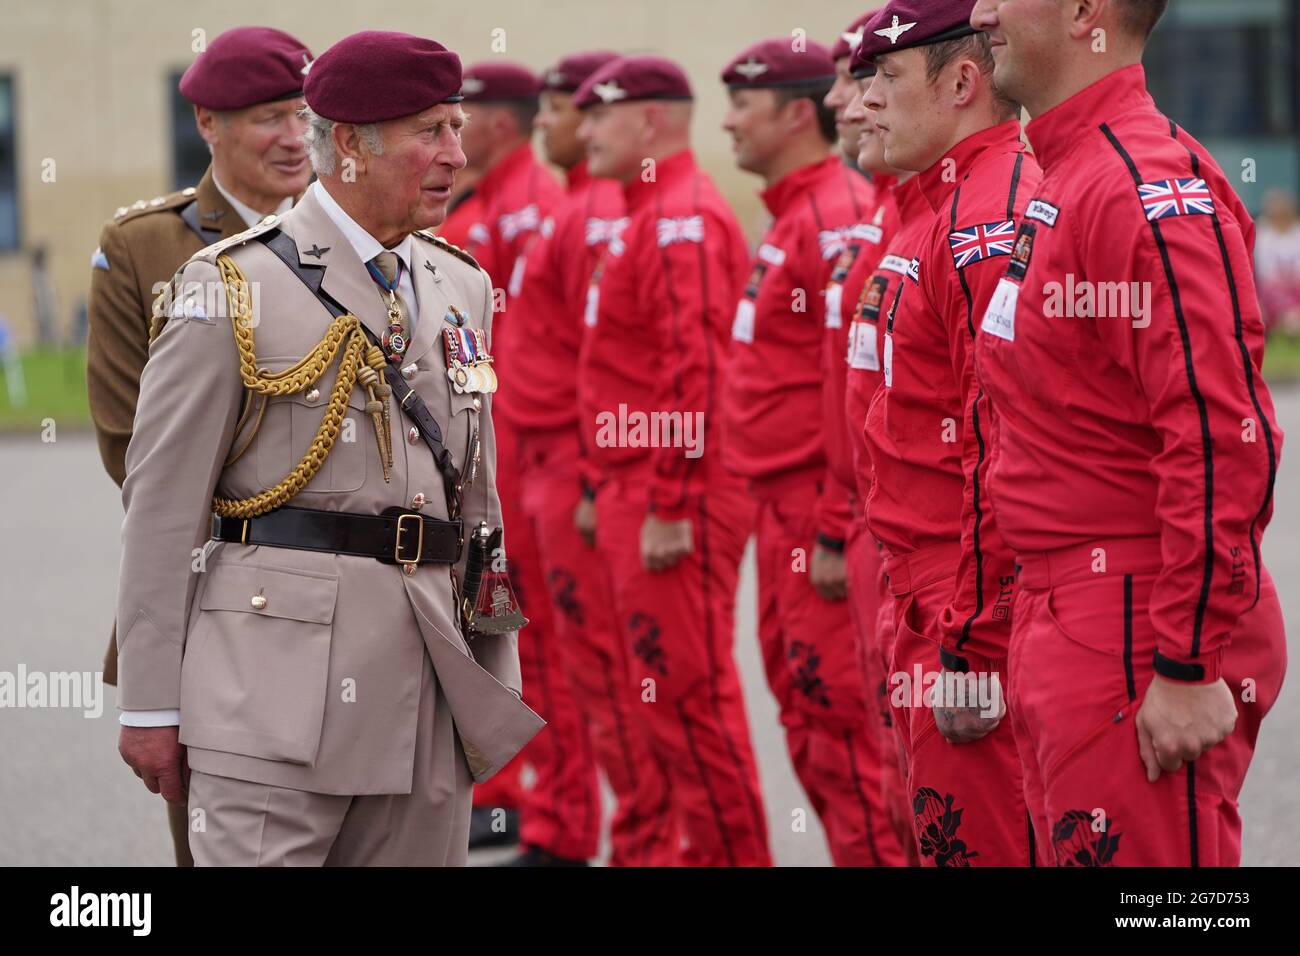 The Prince of Wales speaks to members of the Red Devils, the Parachute Regiment's parachute display team, during a ceremony to new to the Parachute Regiment at Merville Barracks in